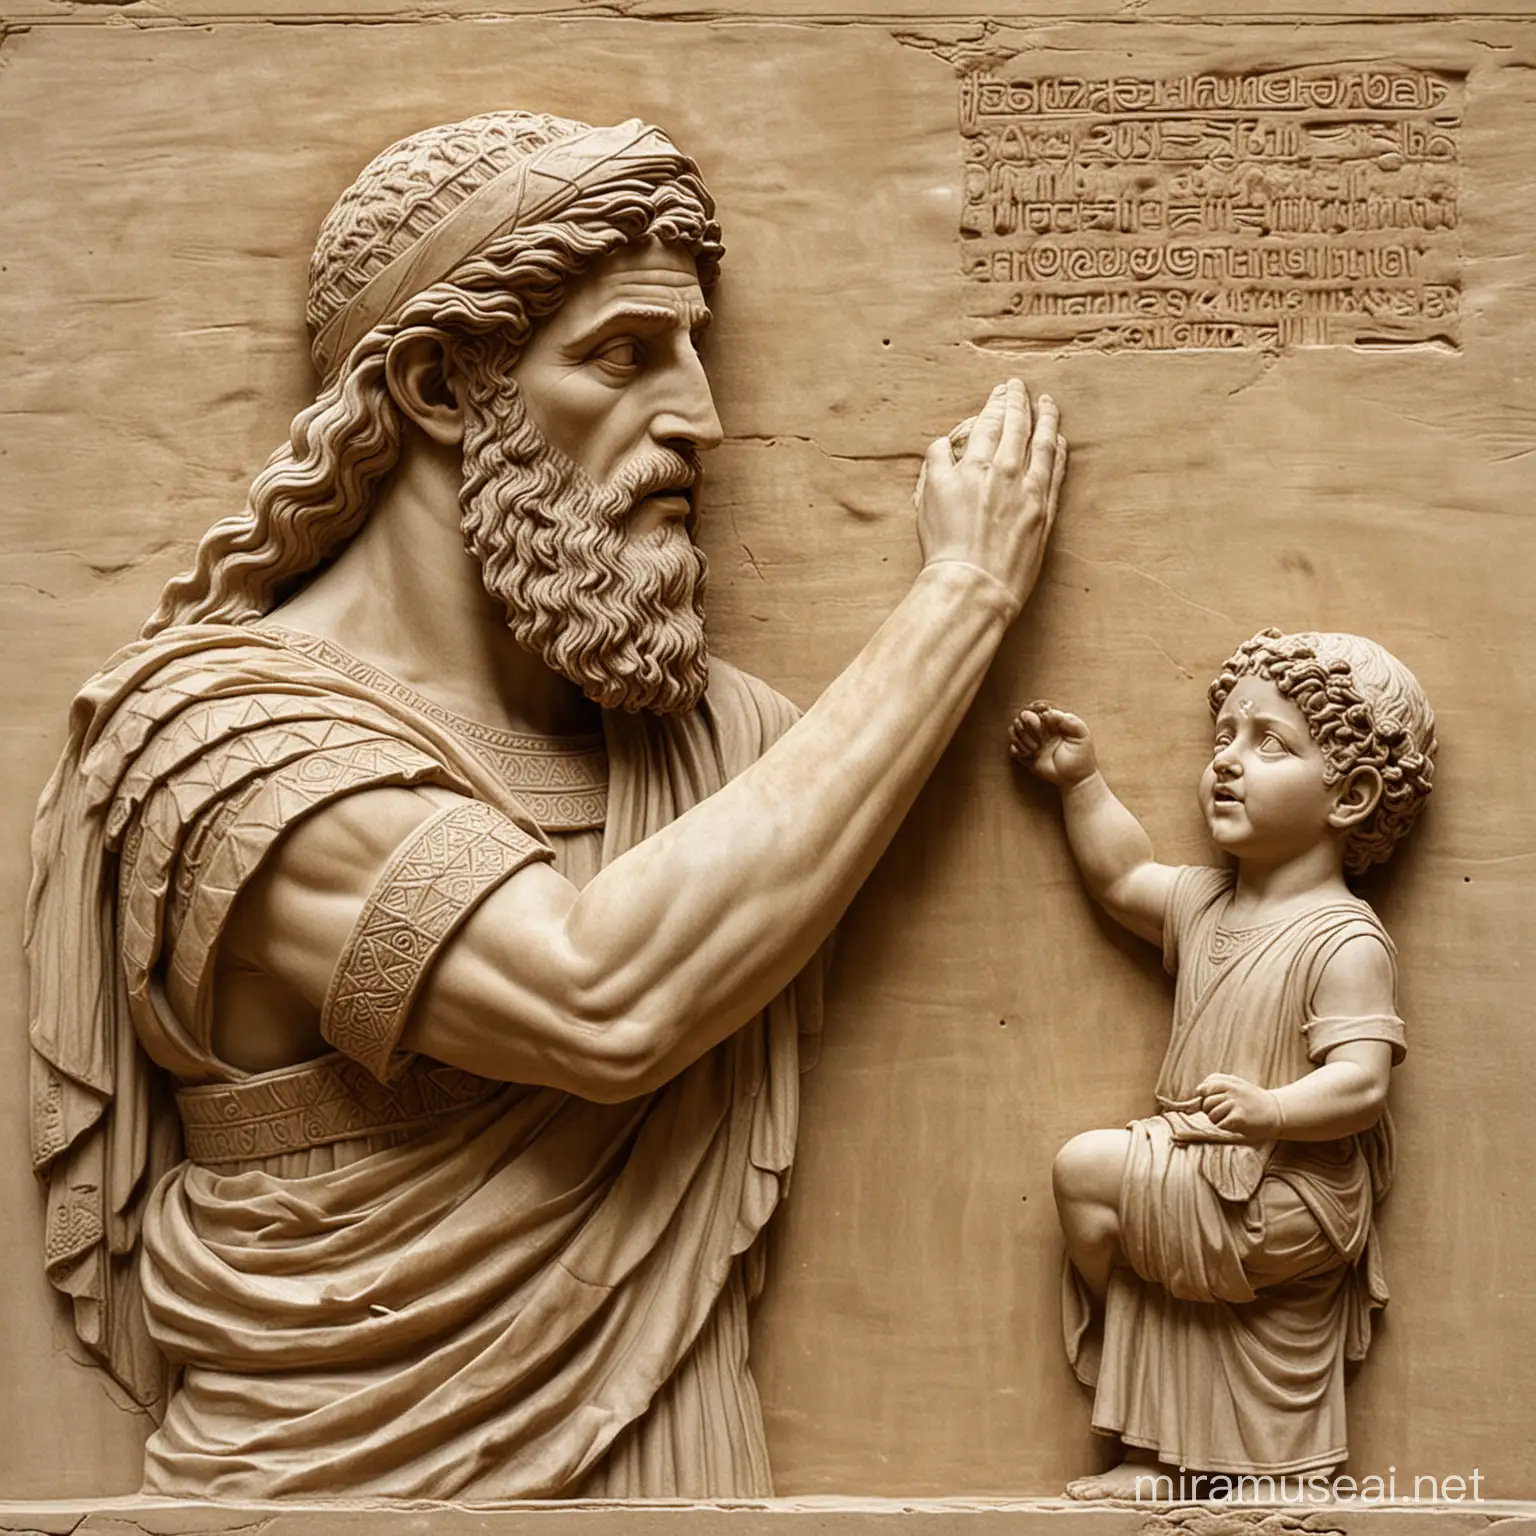 Powerful Roman Man Holding Terrified Childs Hand in Babylonian Setting